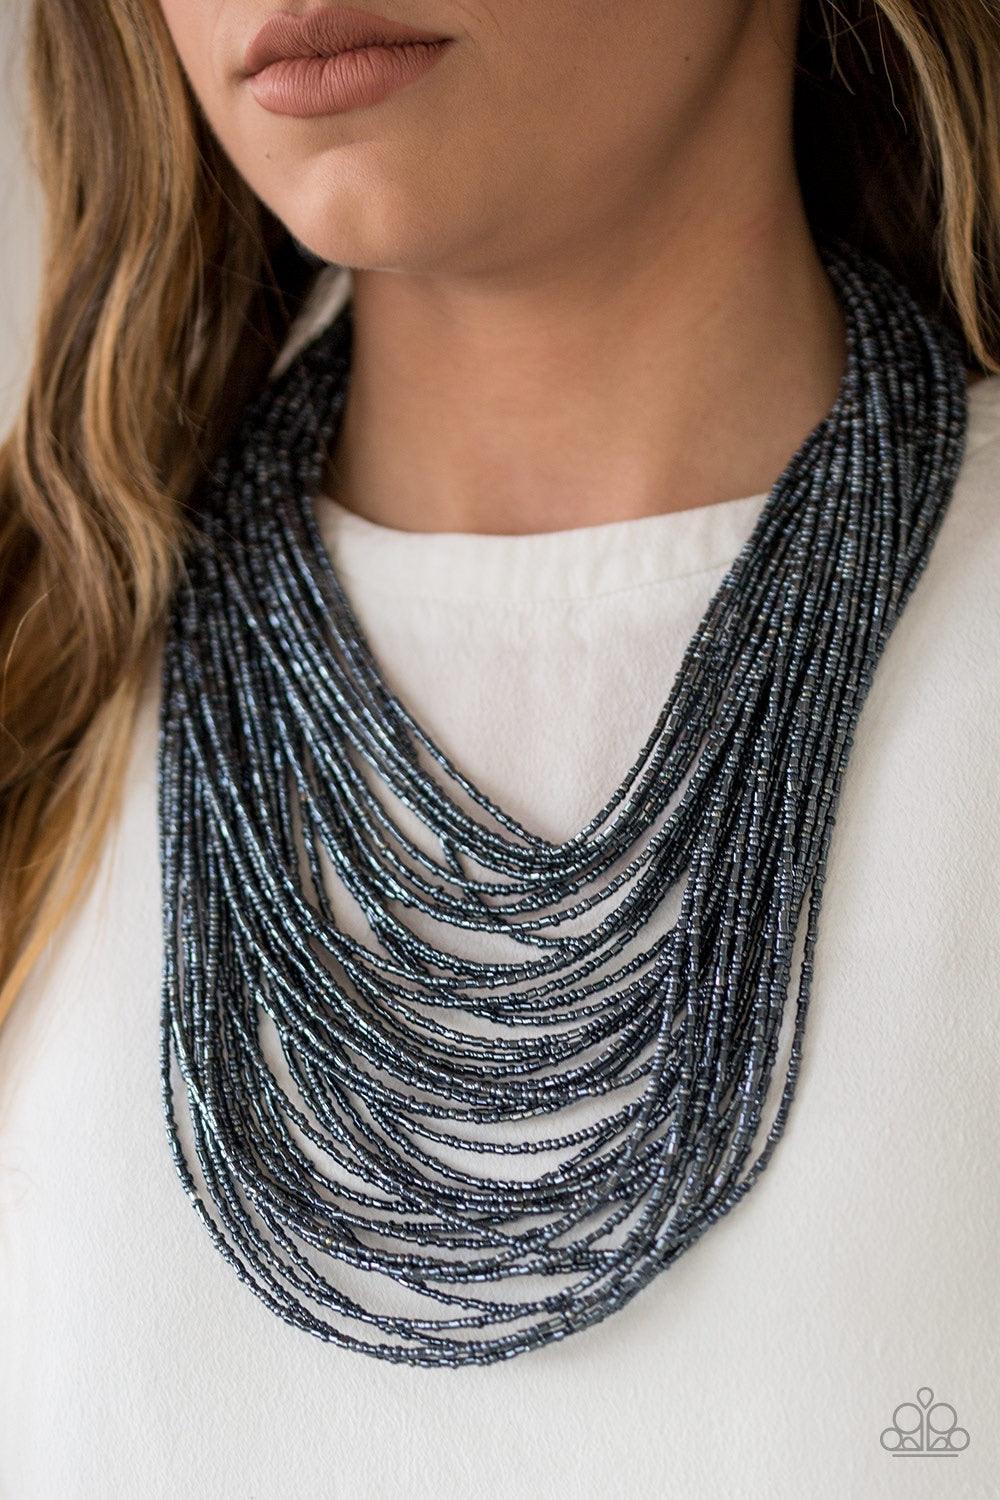 Paparazzi Accessories Ice Storm - Blue Brushed in an icy metallic shimmer, countless strands of blue seed beads drape across the chest in a bold fashion. Featuring a collision of shapes and shimmer, the glittery strands connect to two large silver accents